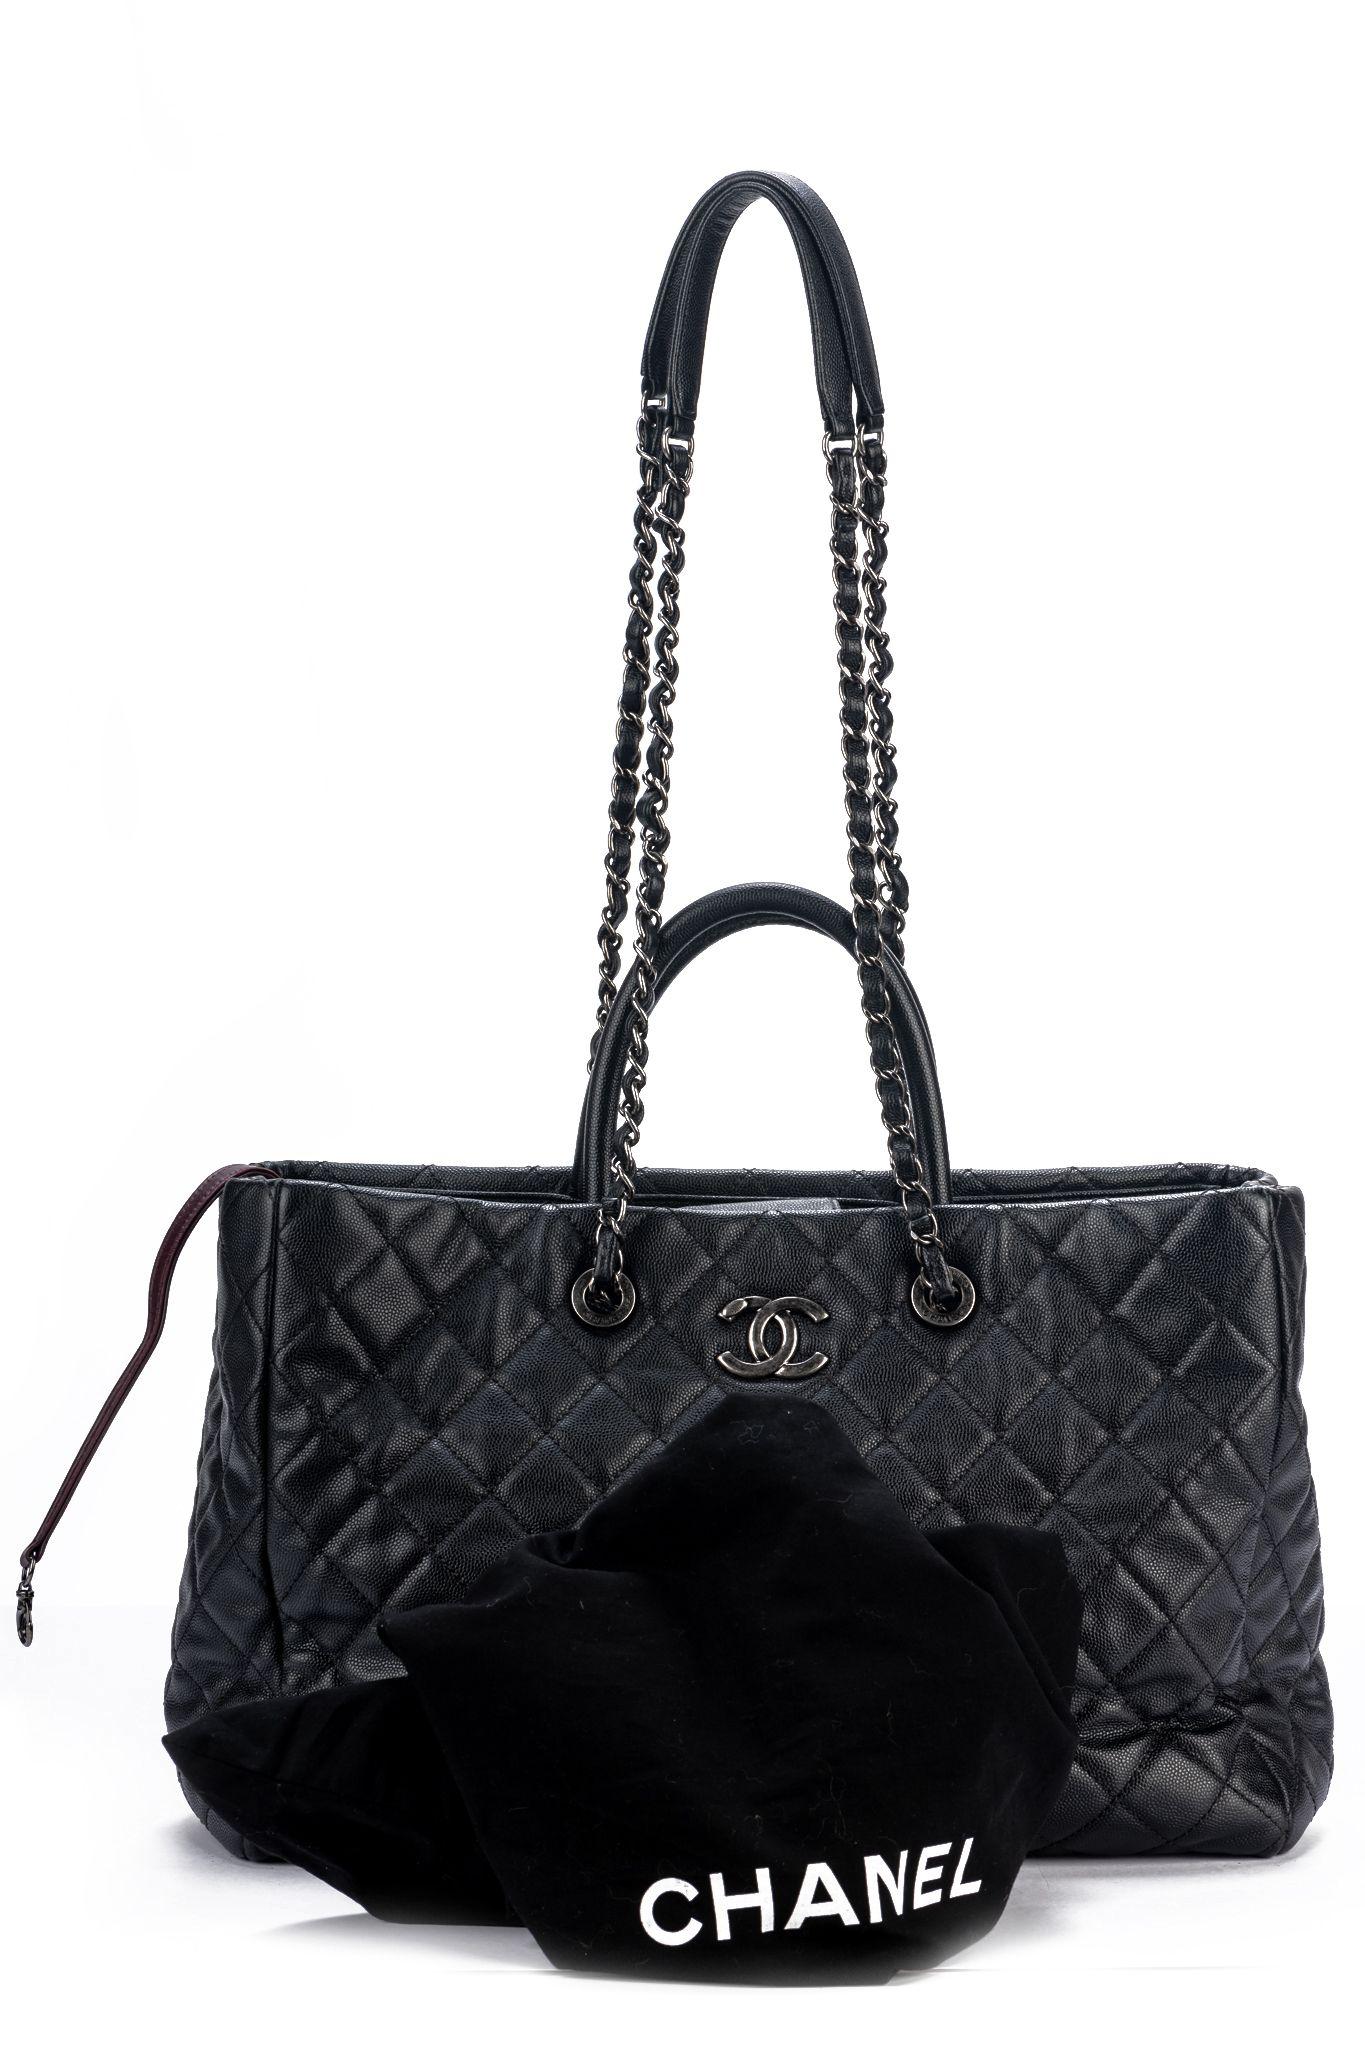 Chanel Large Black Caviar 2 Way Tote For Sale 11